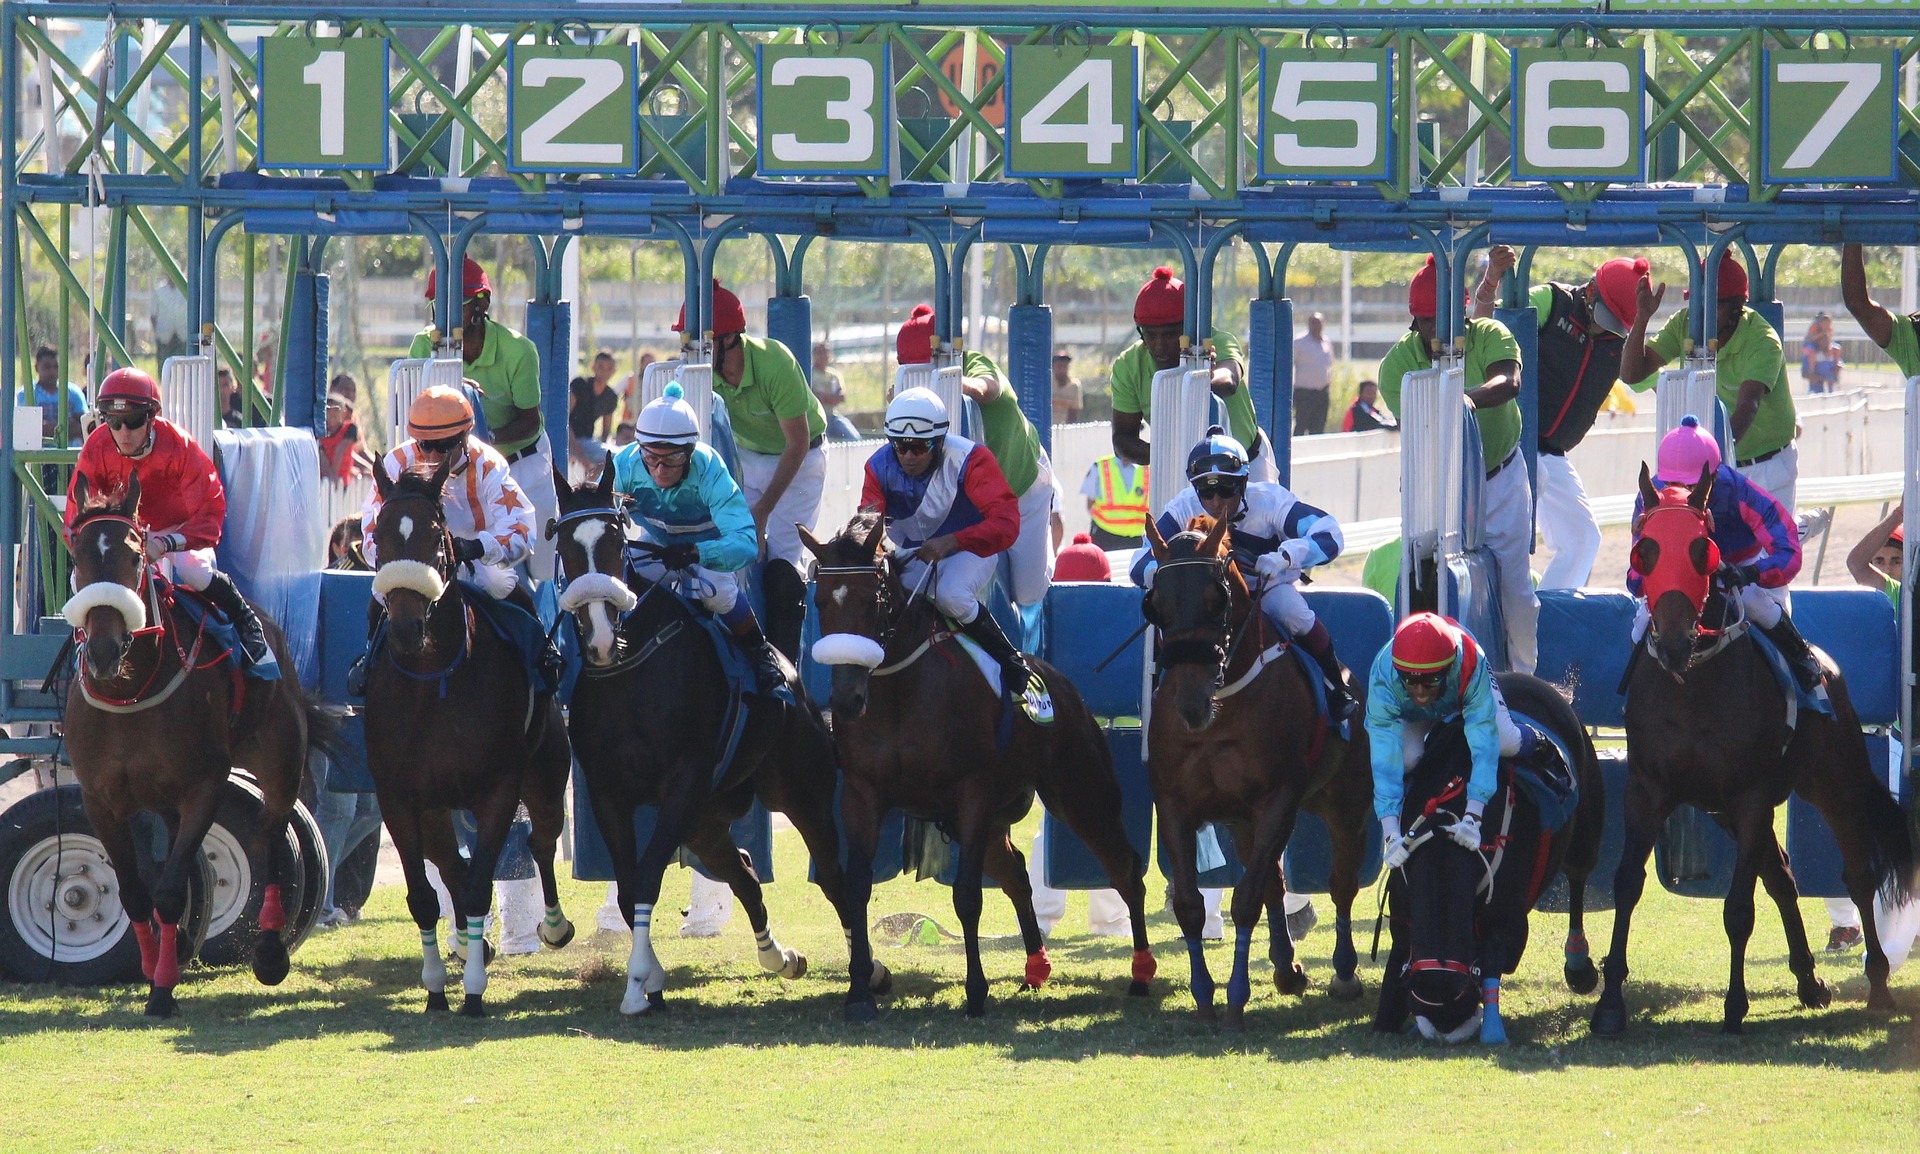 horses at the starting gate, one on the right side of the image is falling.